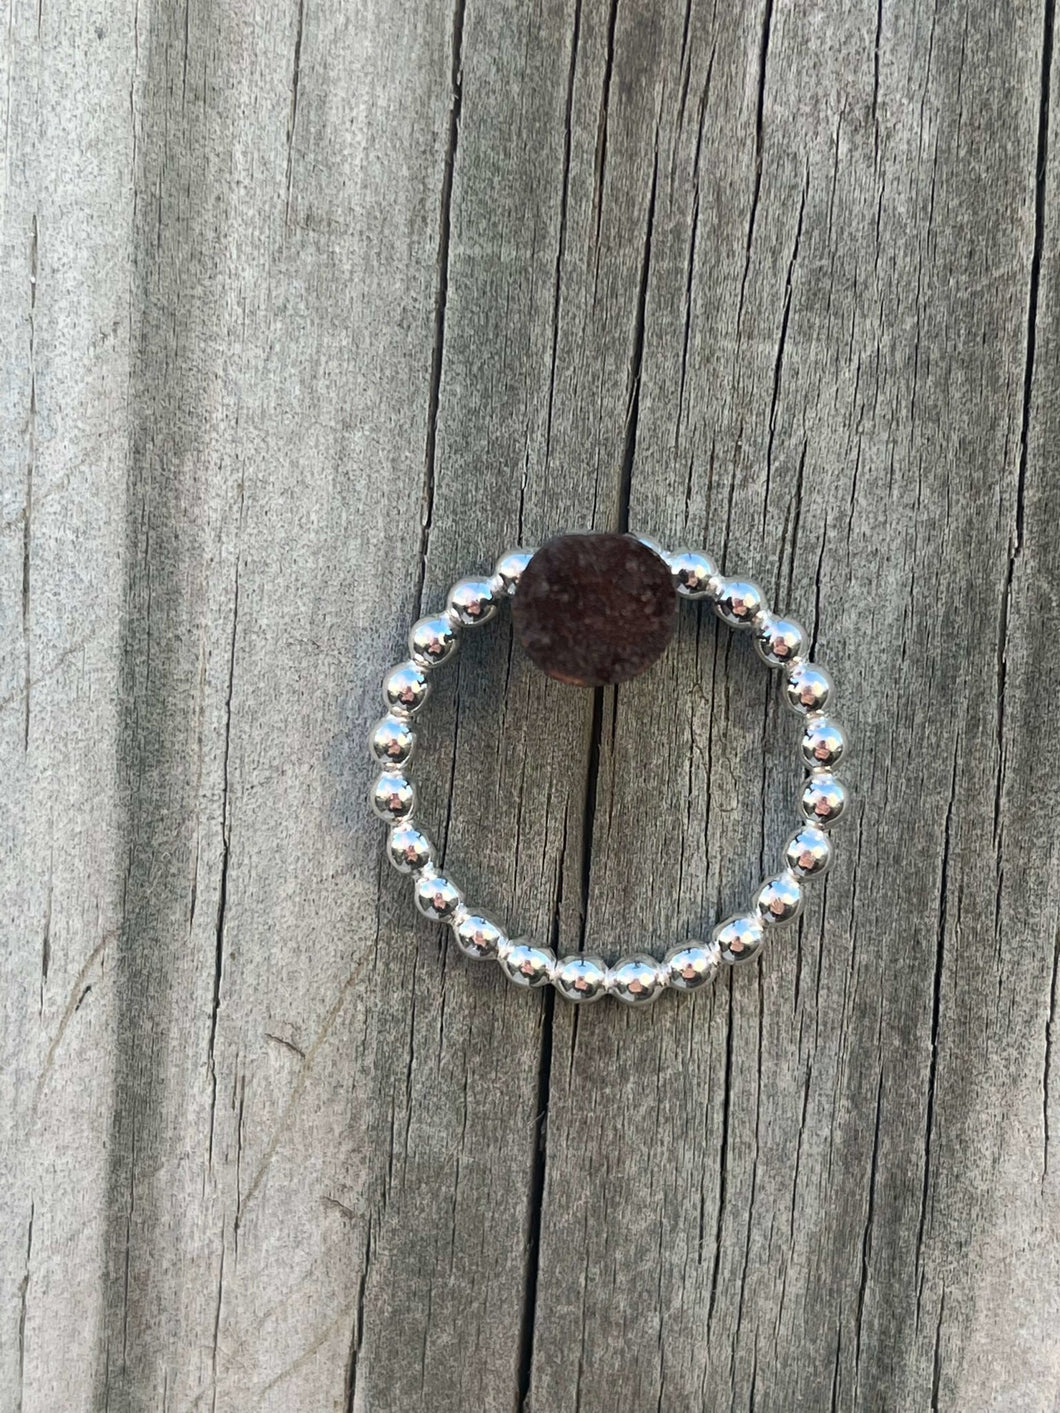 Sterling silver beaded wire ring.  Wear it alone or stack it with your favorites!